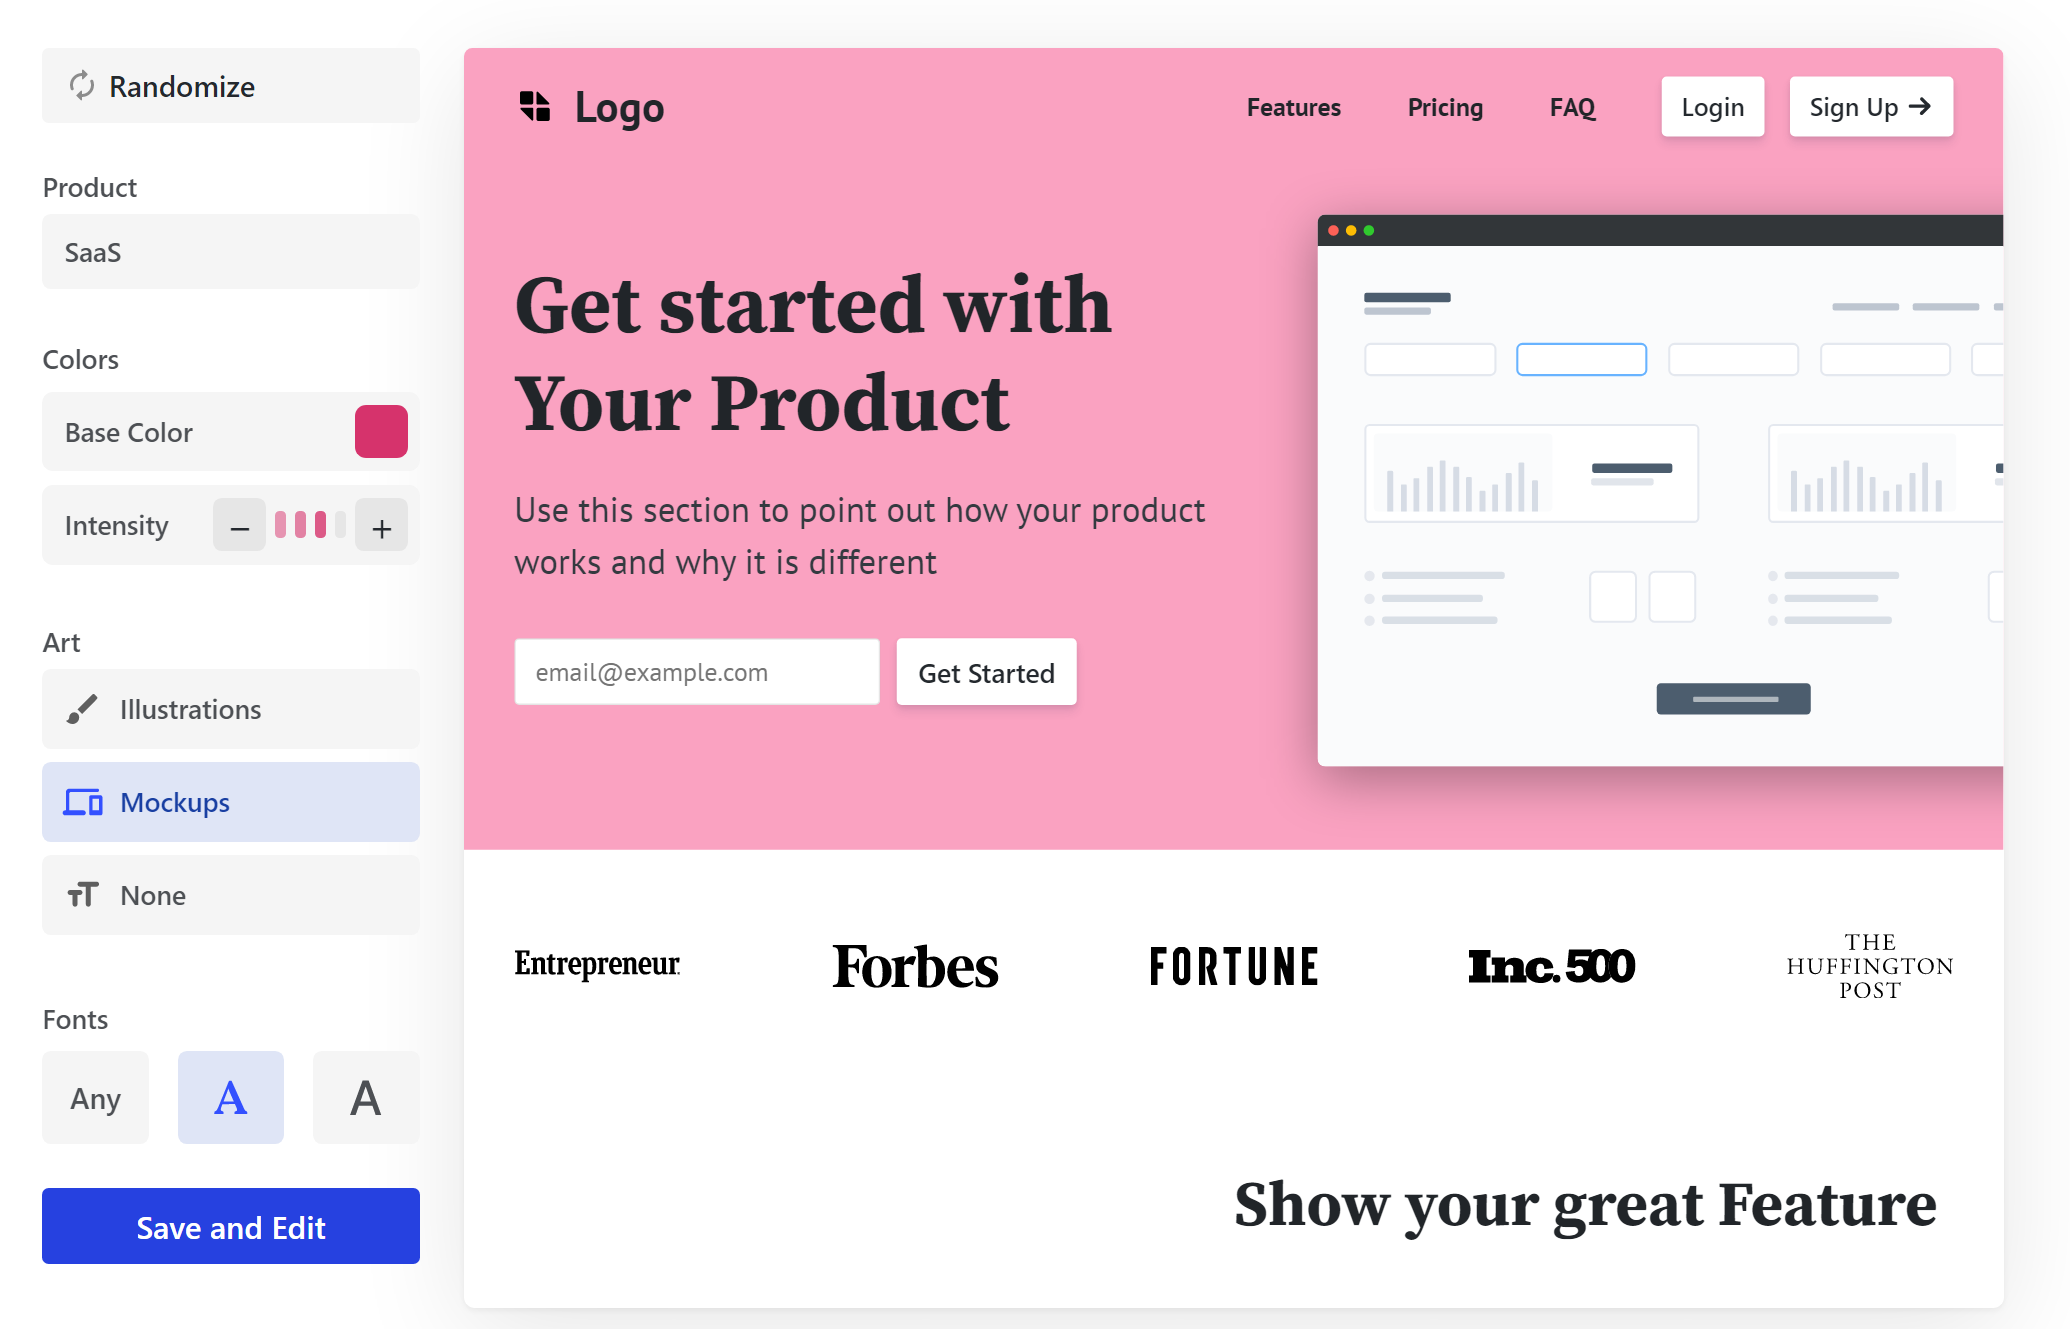 Umso is built for startups hoping to launch their landing page quickly